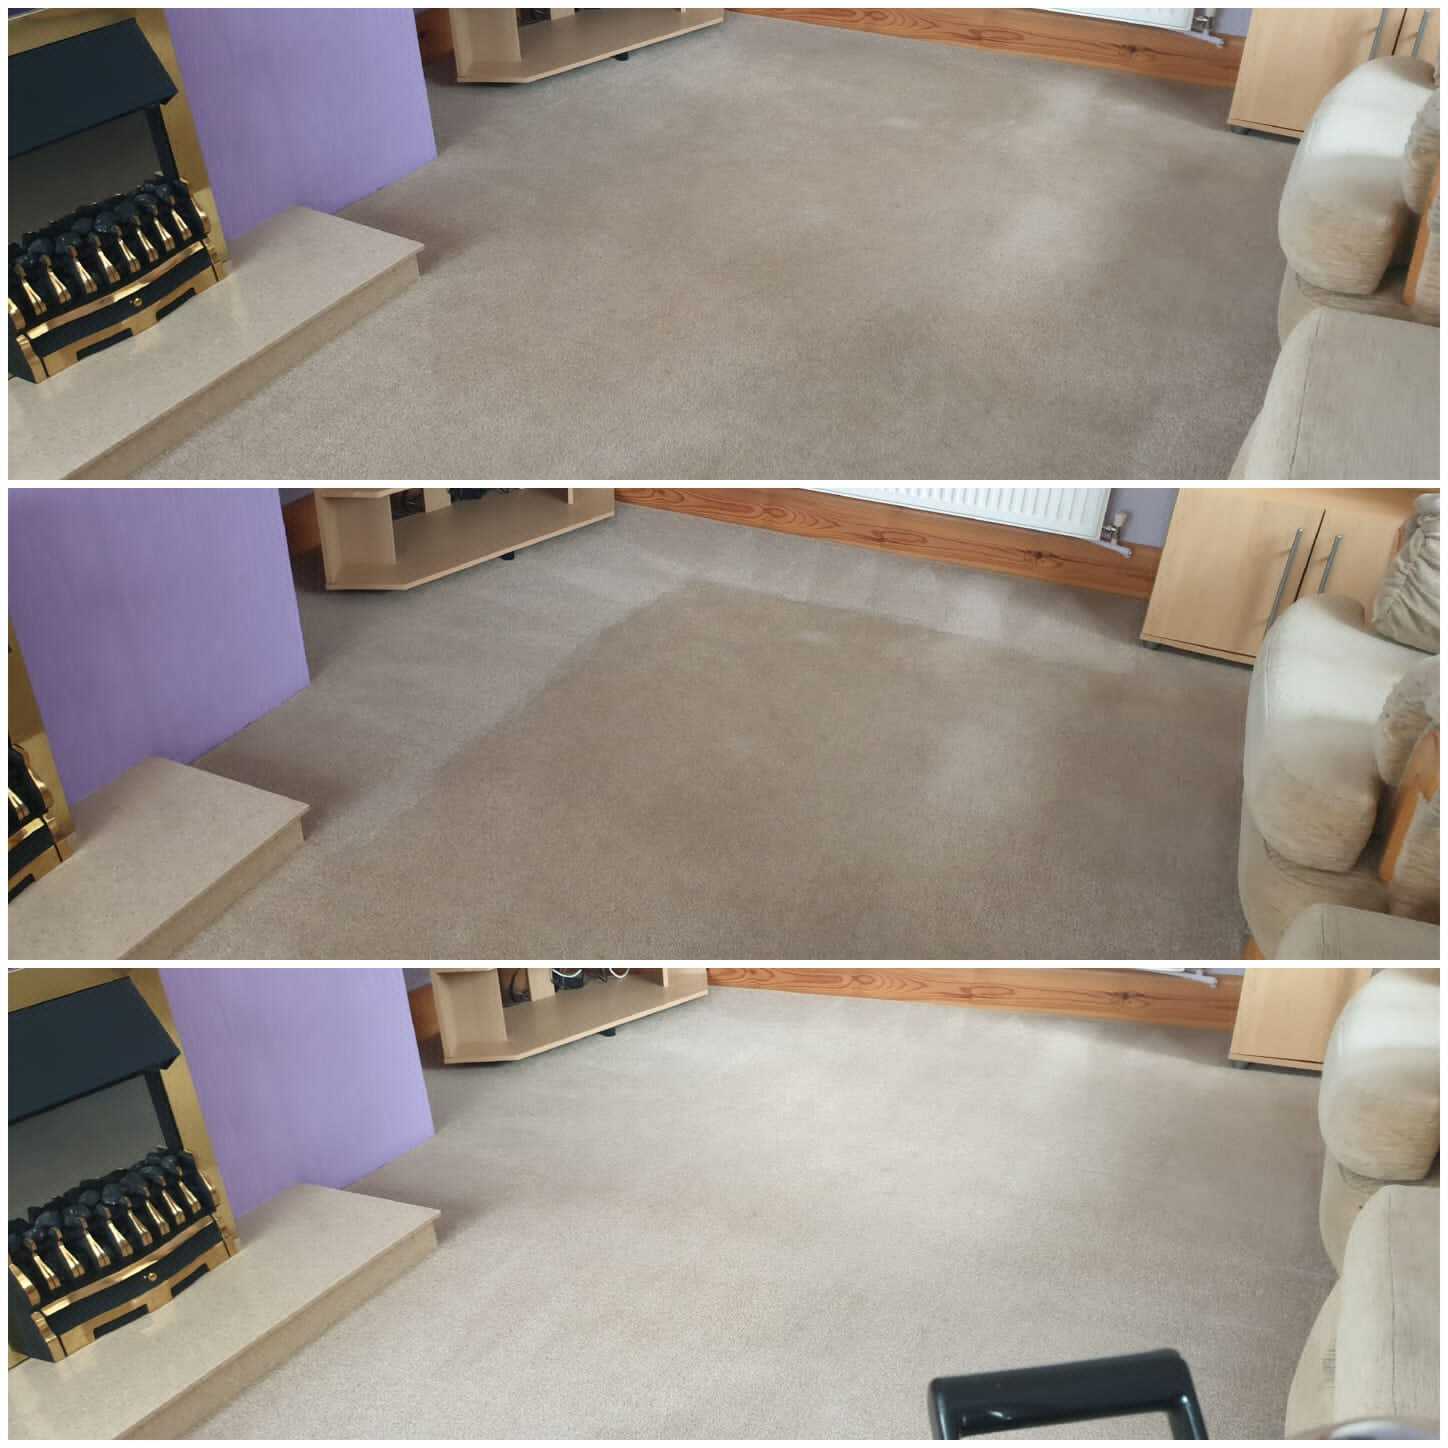 Carpets before and after